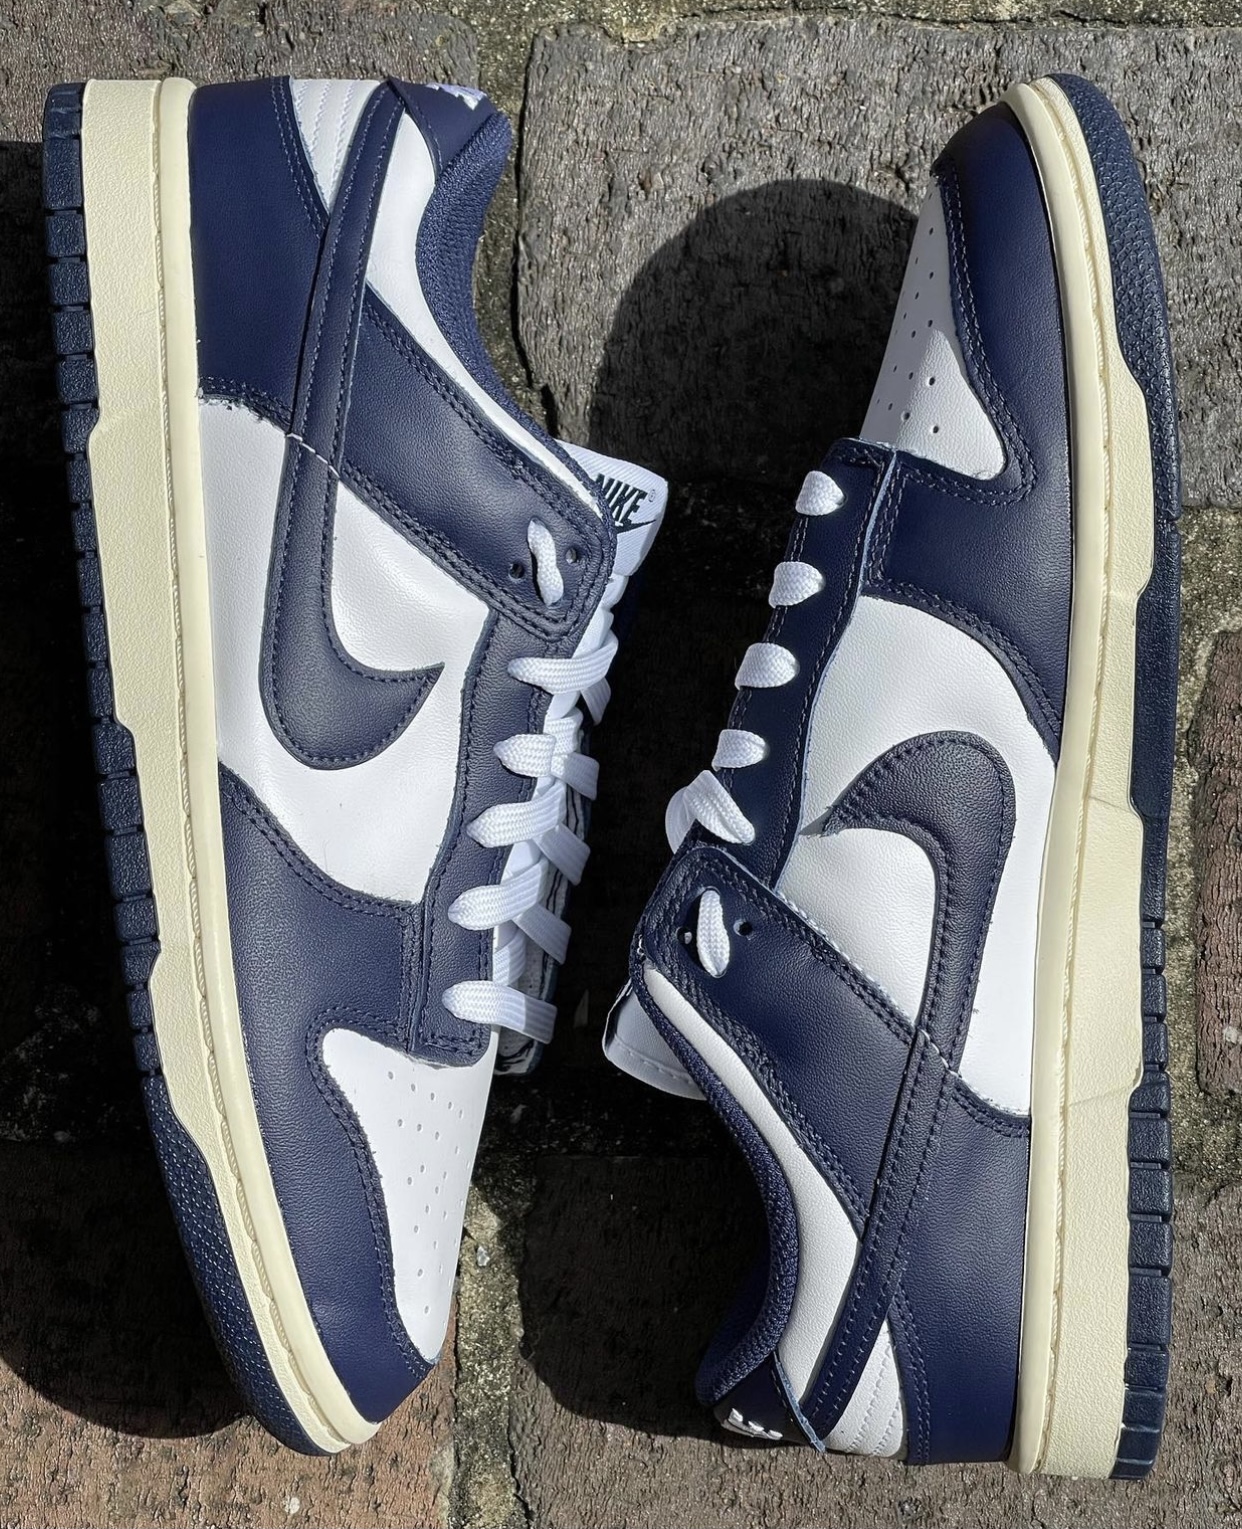 Nike Dunk Low Vintage Navy Release Date